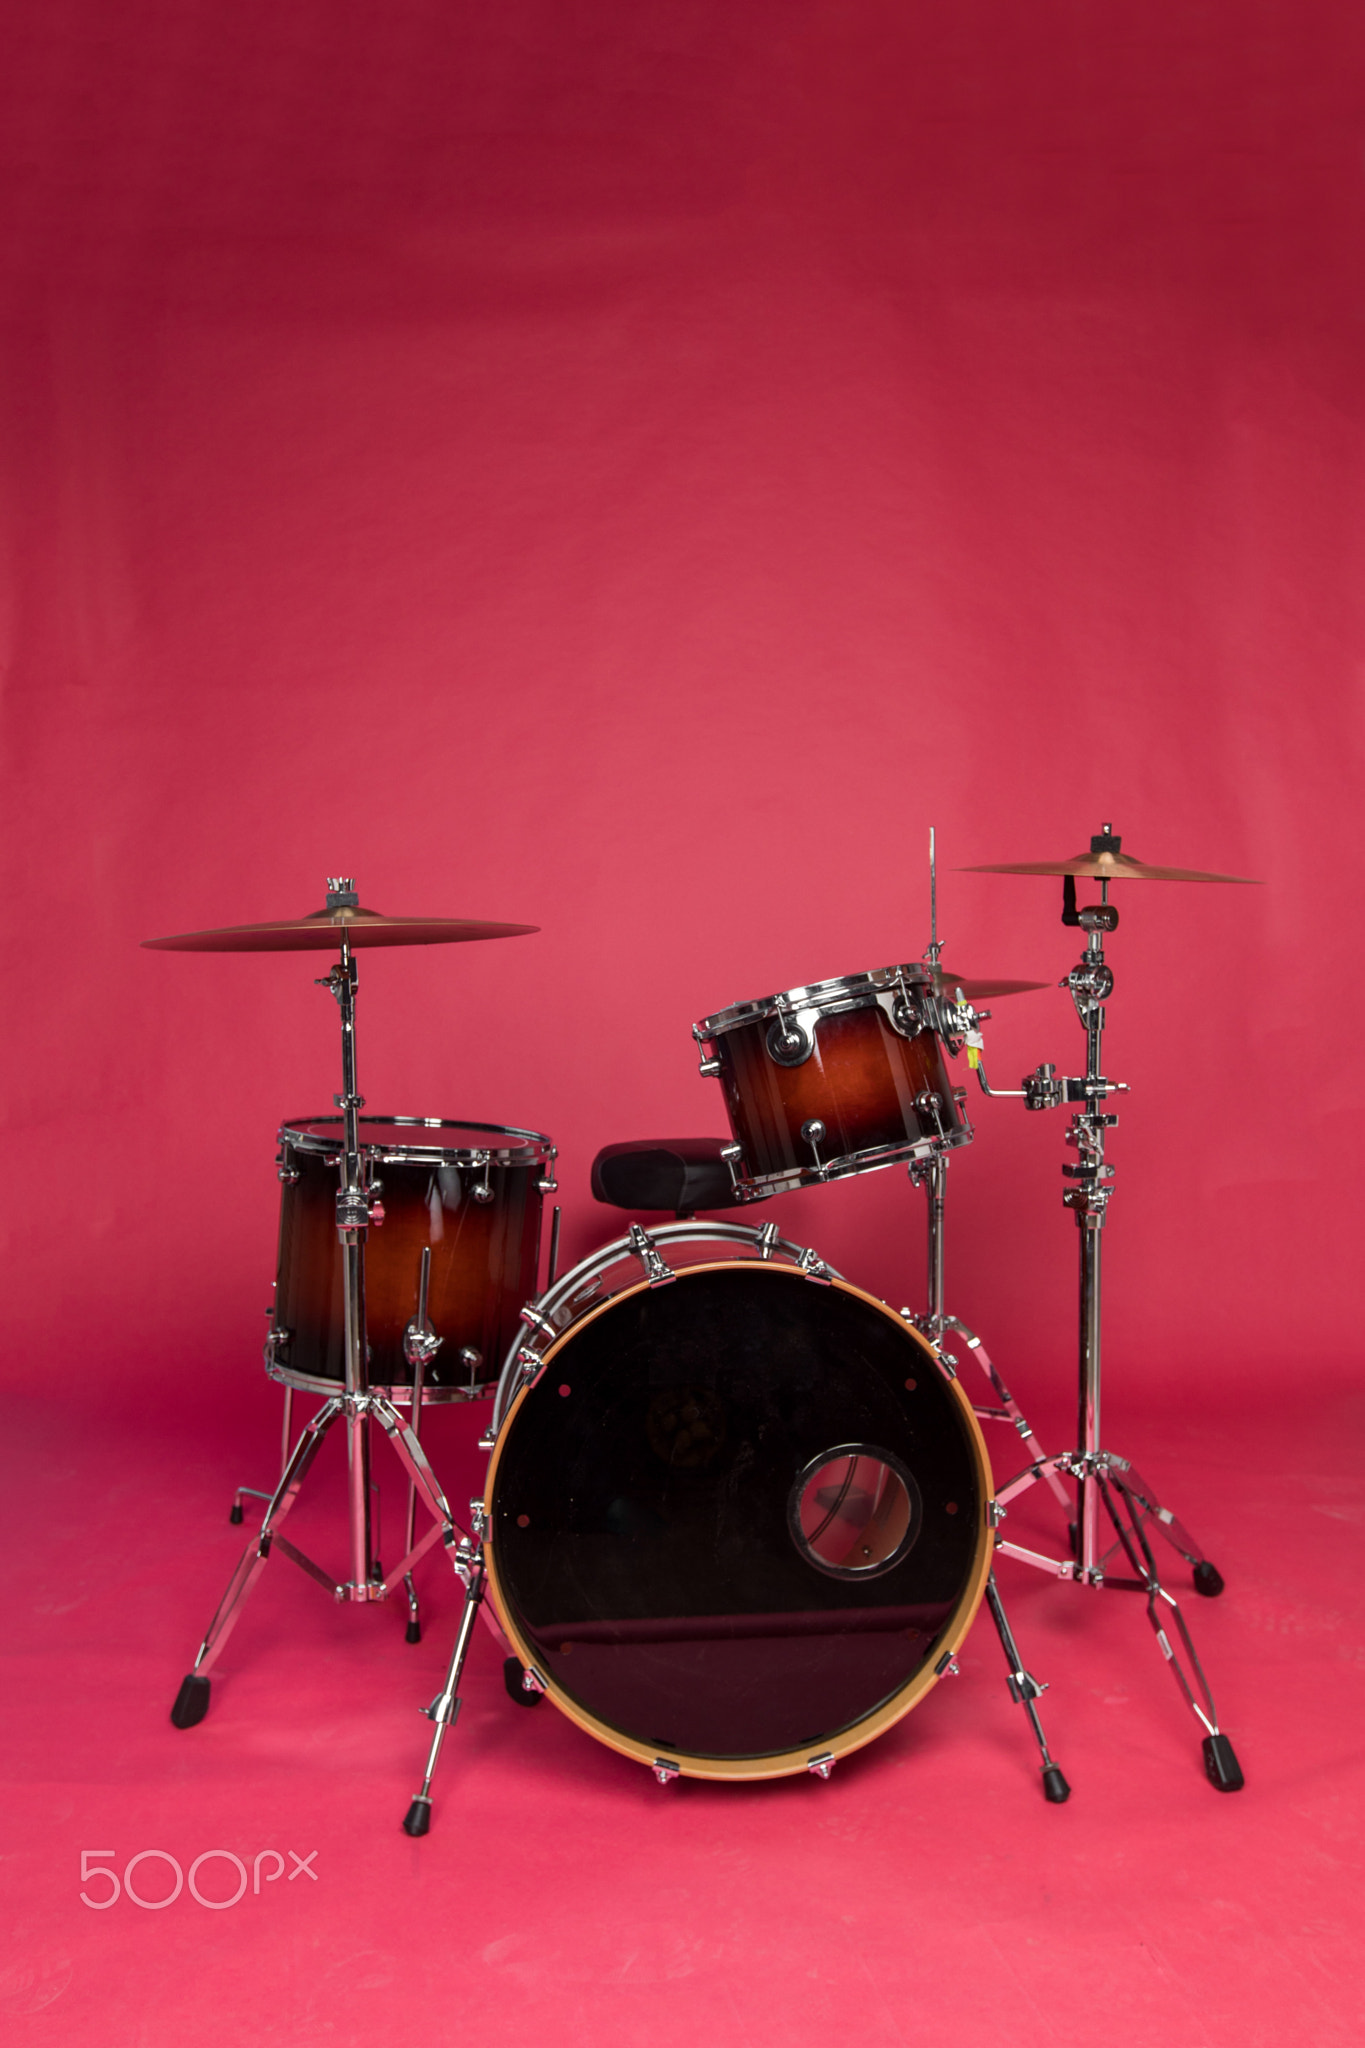 Drum set on a red background